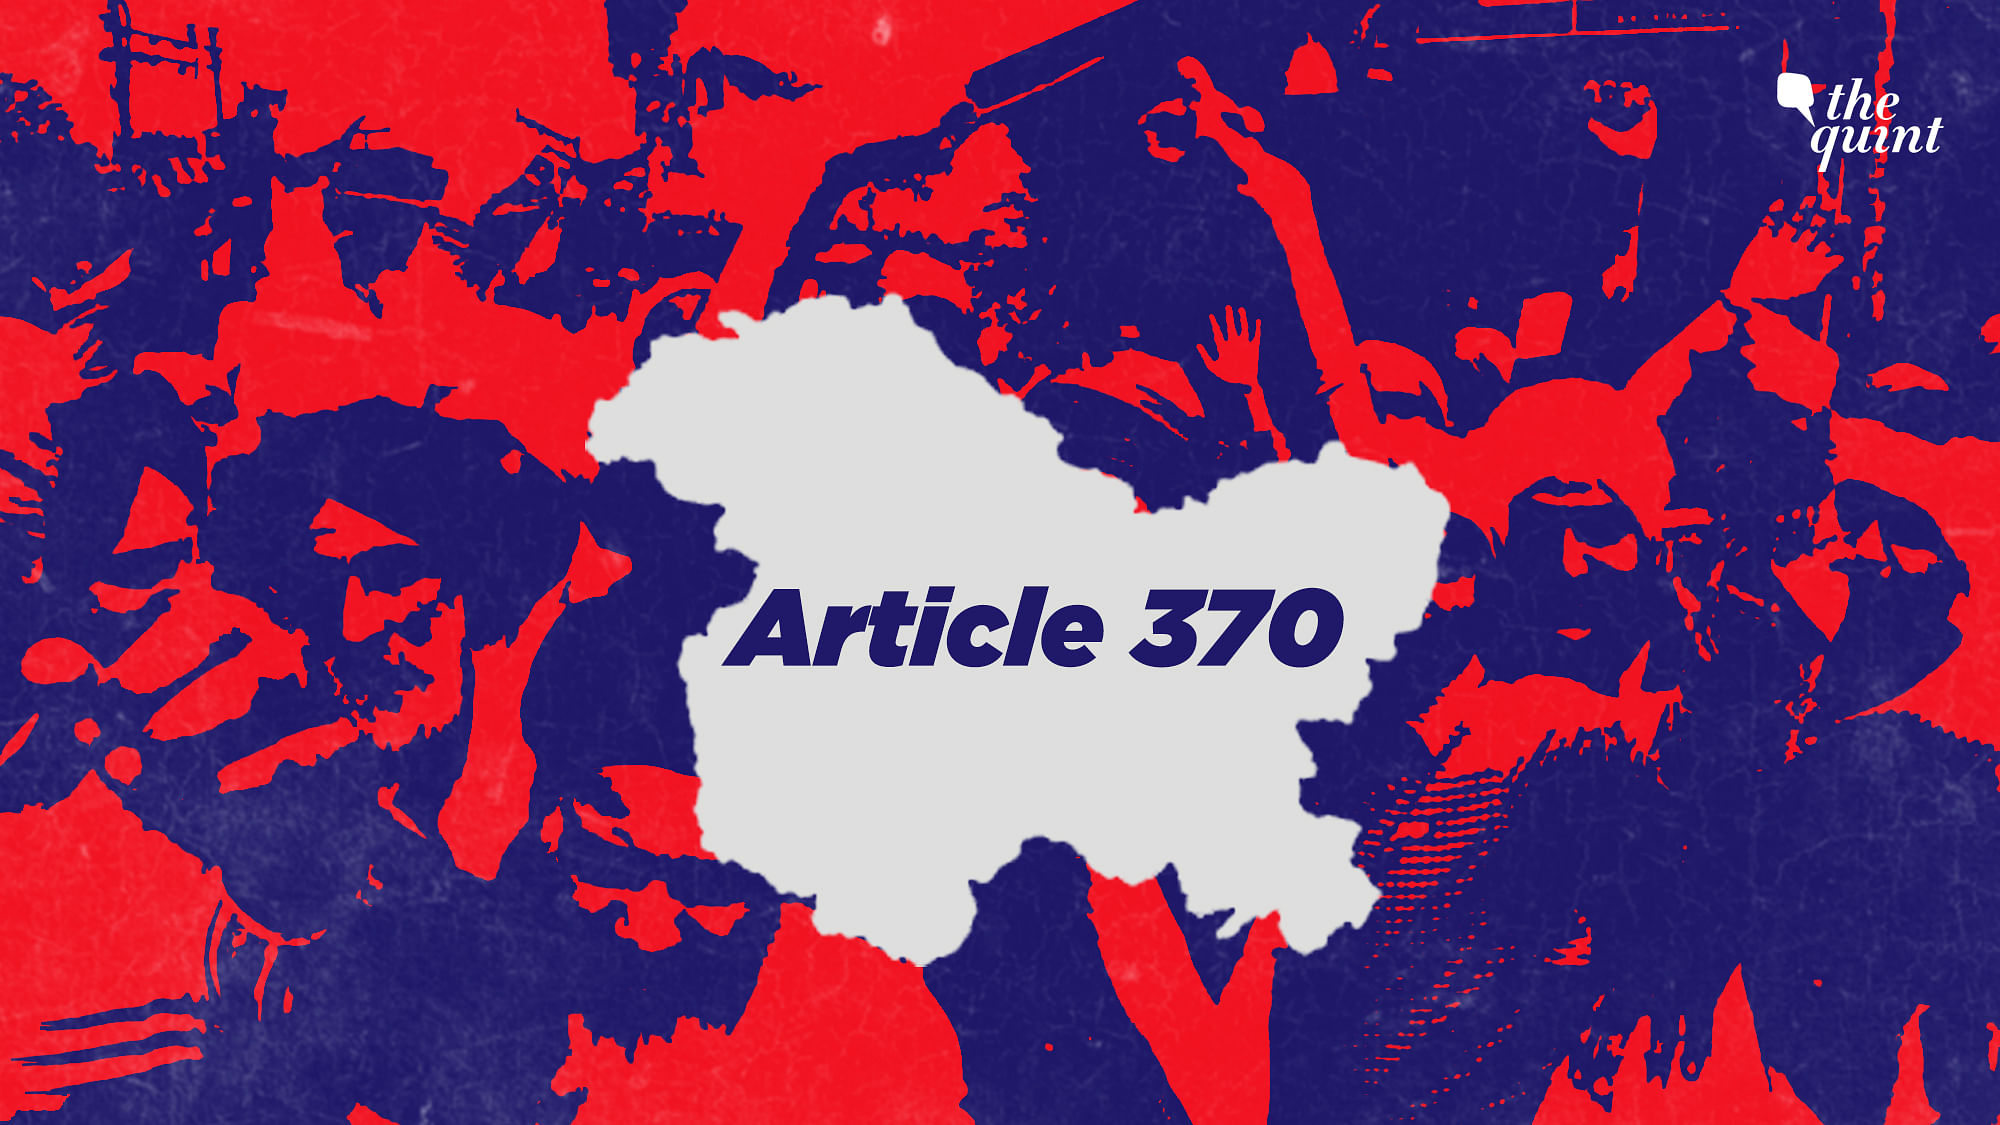 The impact of Article 370 in Kashmir.&nbsp;